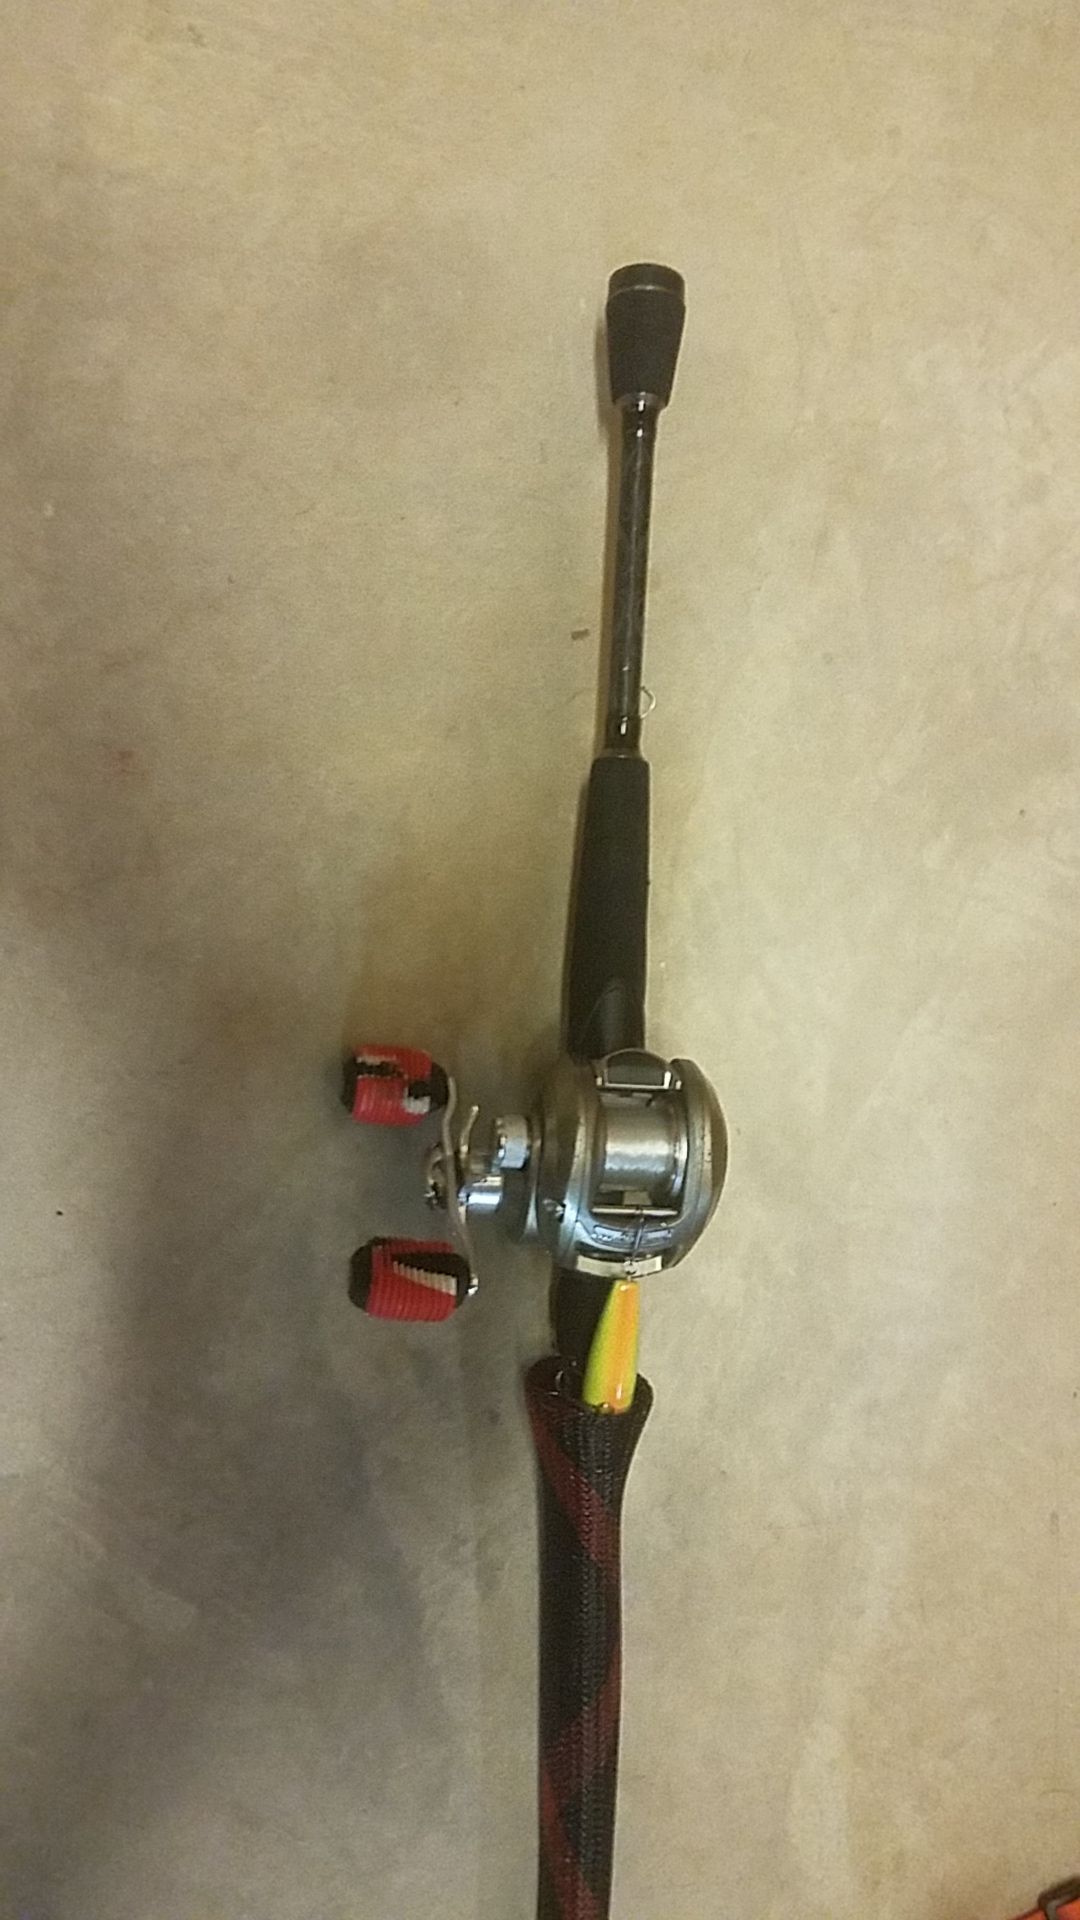 Bass Pro Shop baitcaster with a good bit of bait and fishing stand